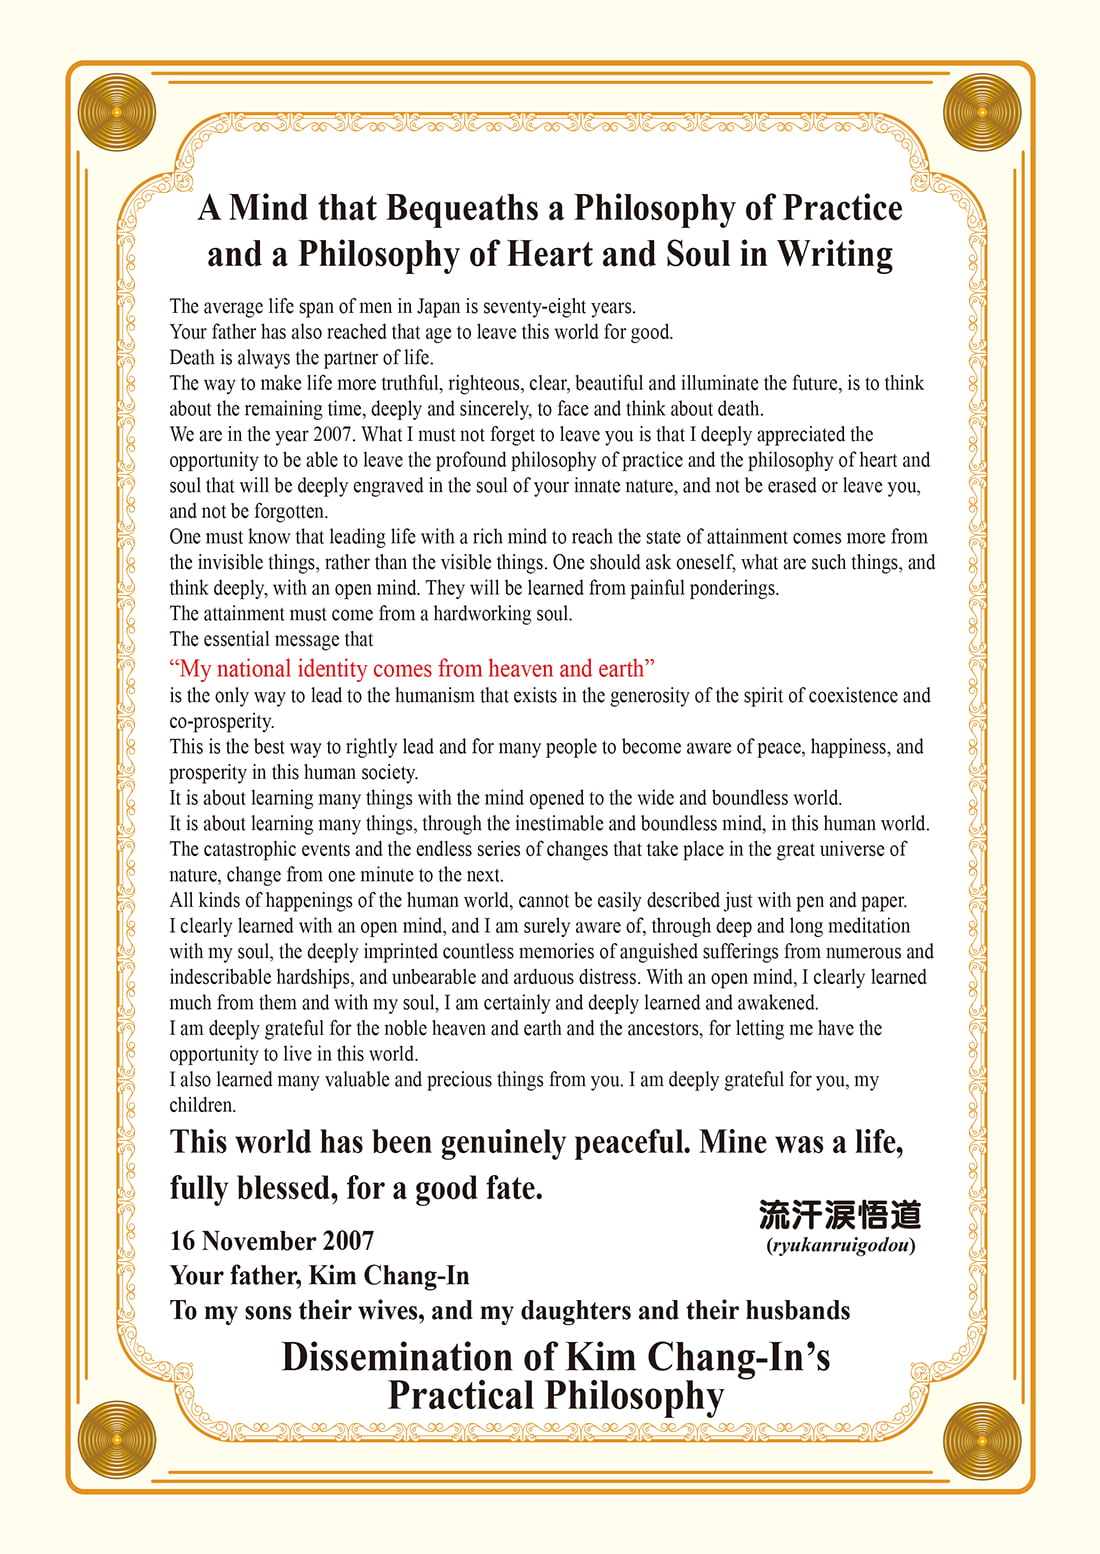 A Mind that Bequeaths a Philosophy of Practice and a Philosophy of Heart and Soul in Writing